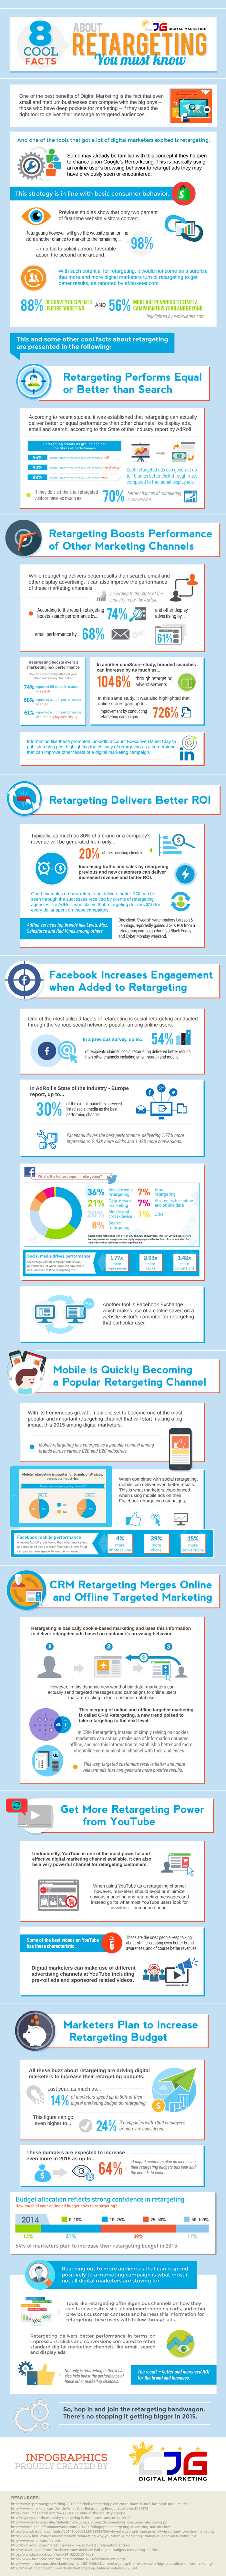 8-Cool-Facts-about-Retargeting-You-Must-Know